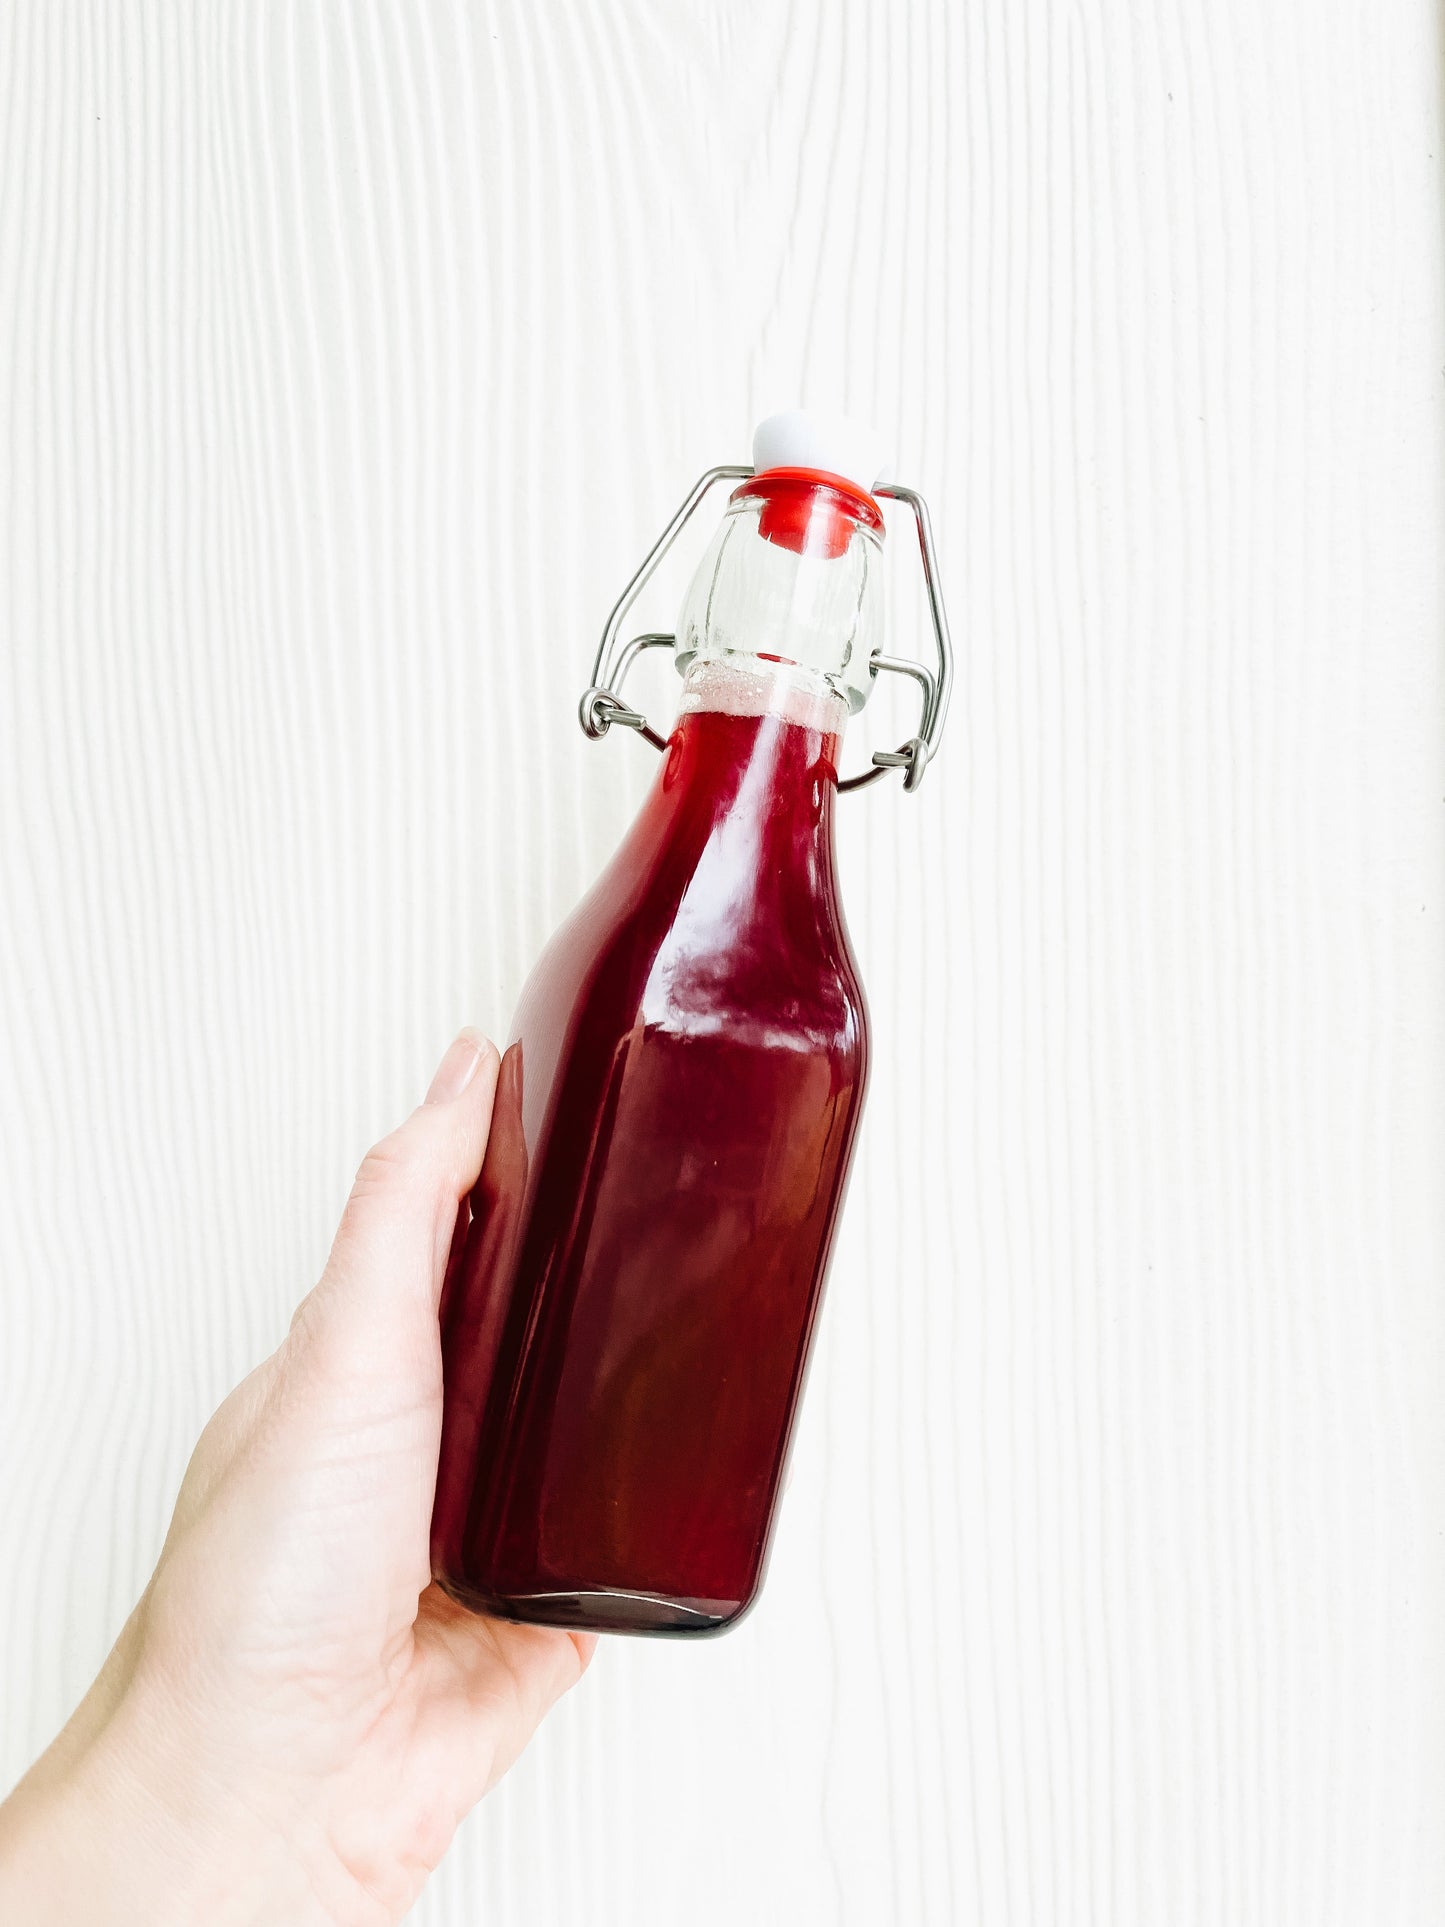 Cranberry Simple Syrup